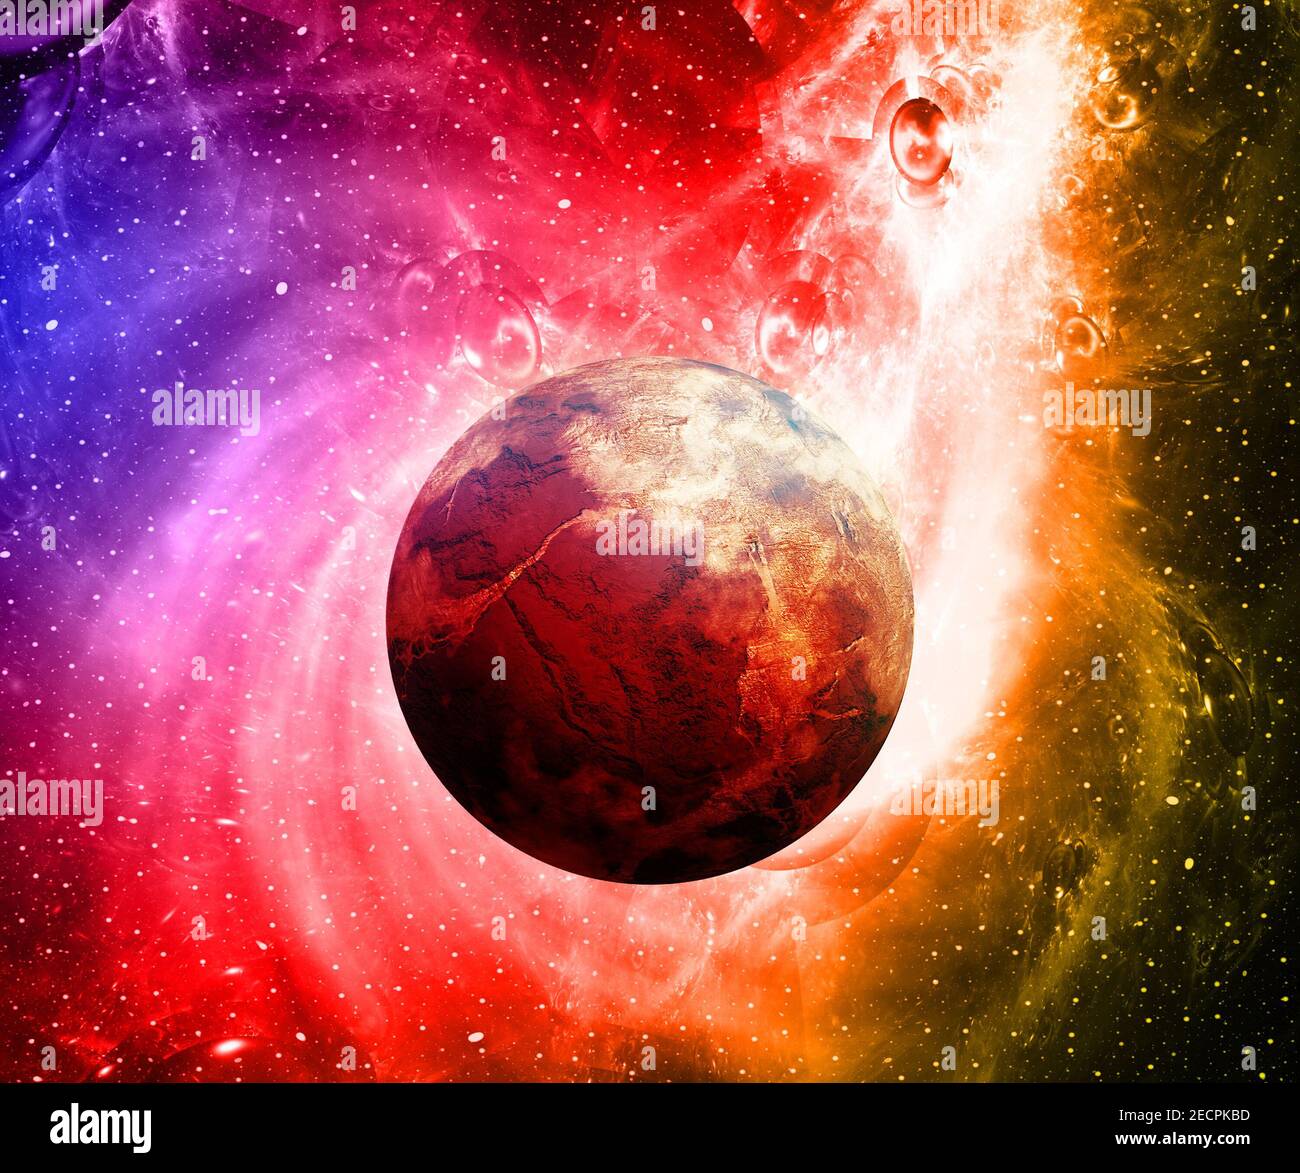 3D illustration artwork of space with planets  nebulas starfield and fractal nebulas Stock Photo